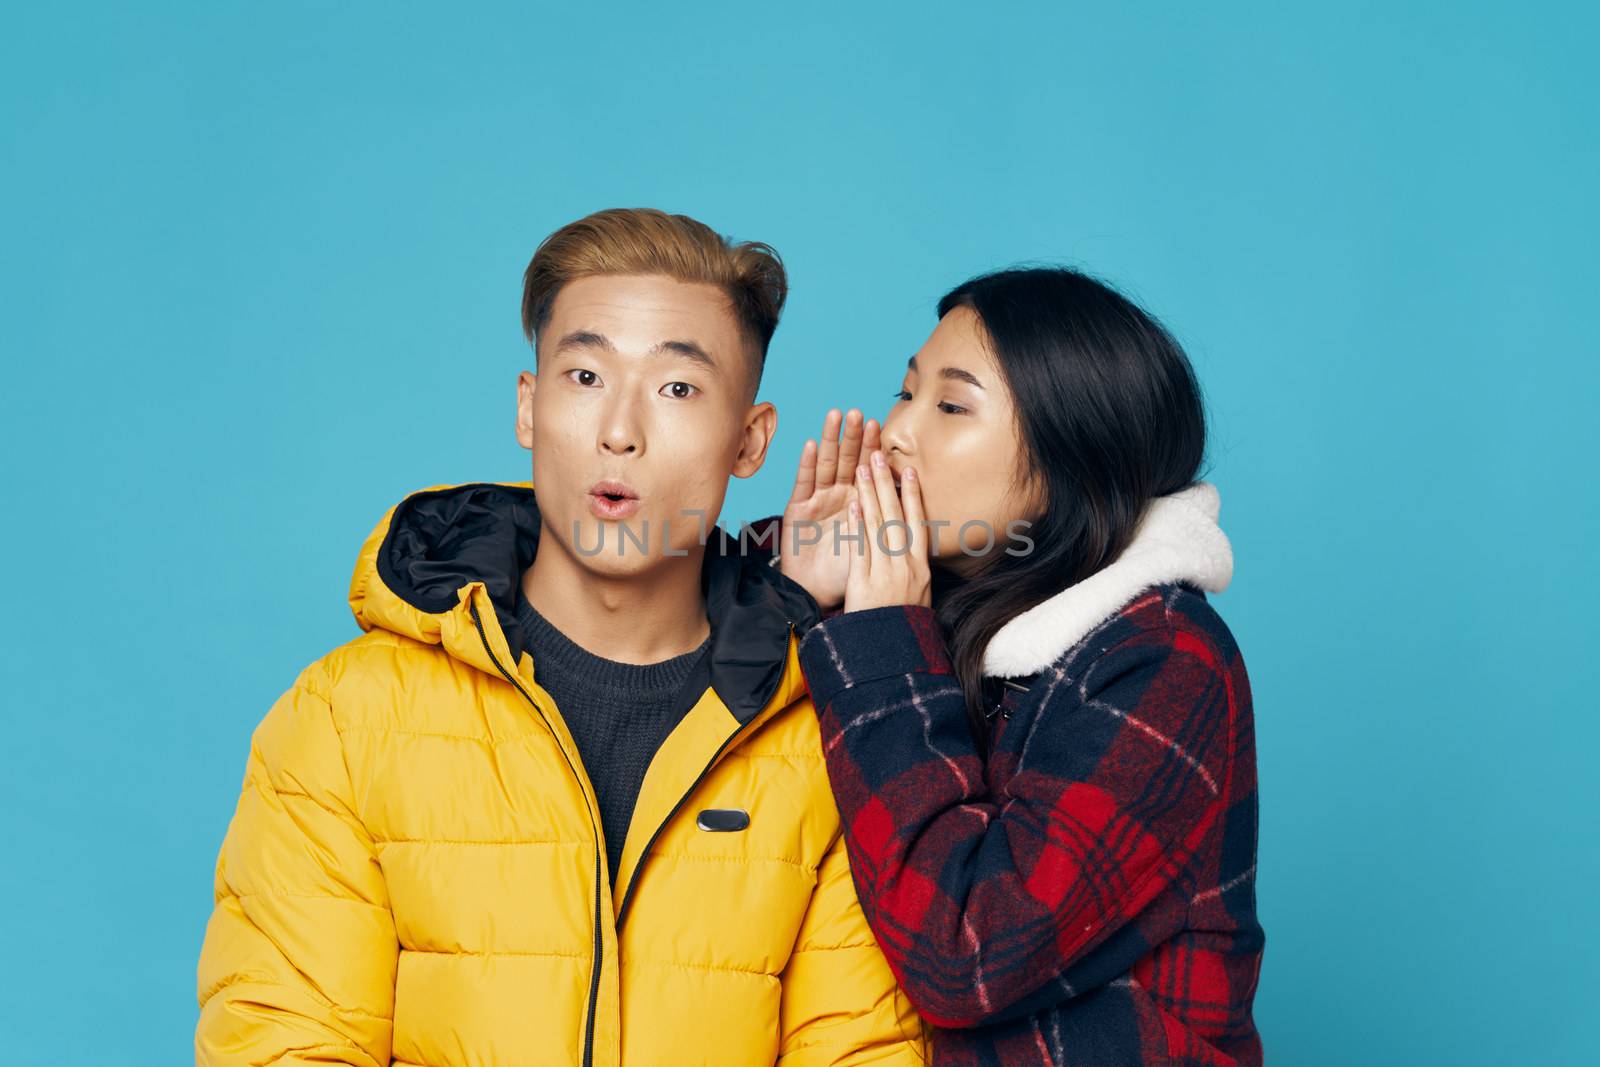 Man and woman in winter jackets communicating fashionable clothes family studio by SHOTPRIME